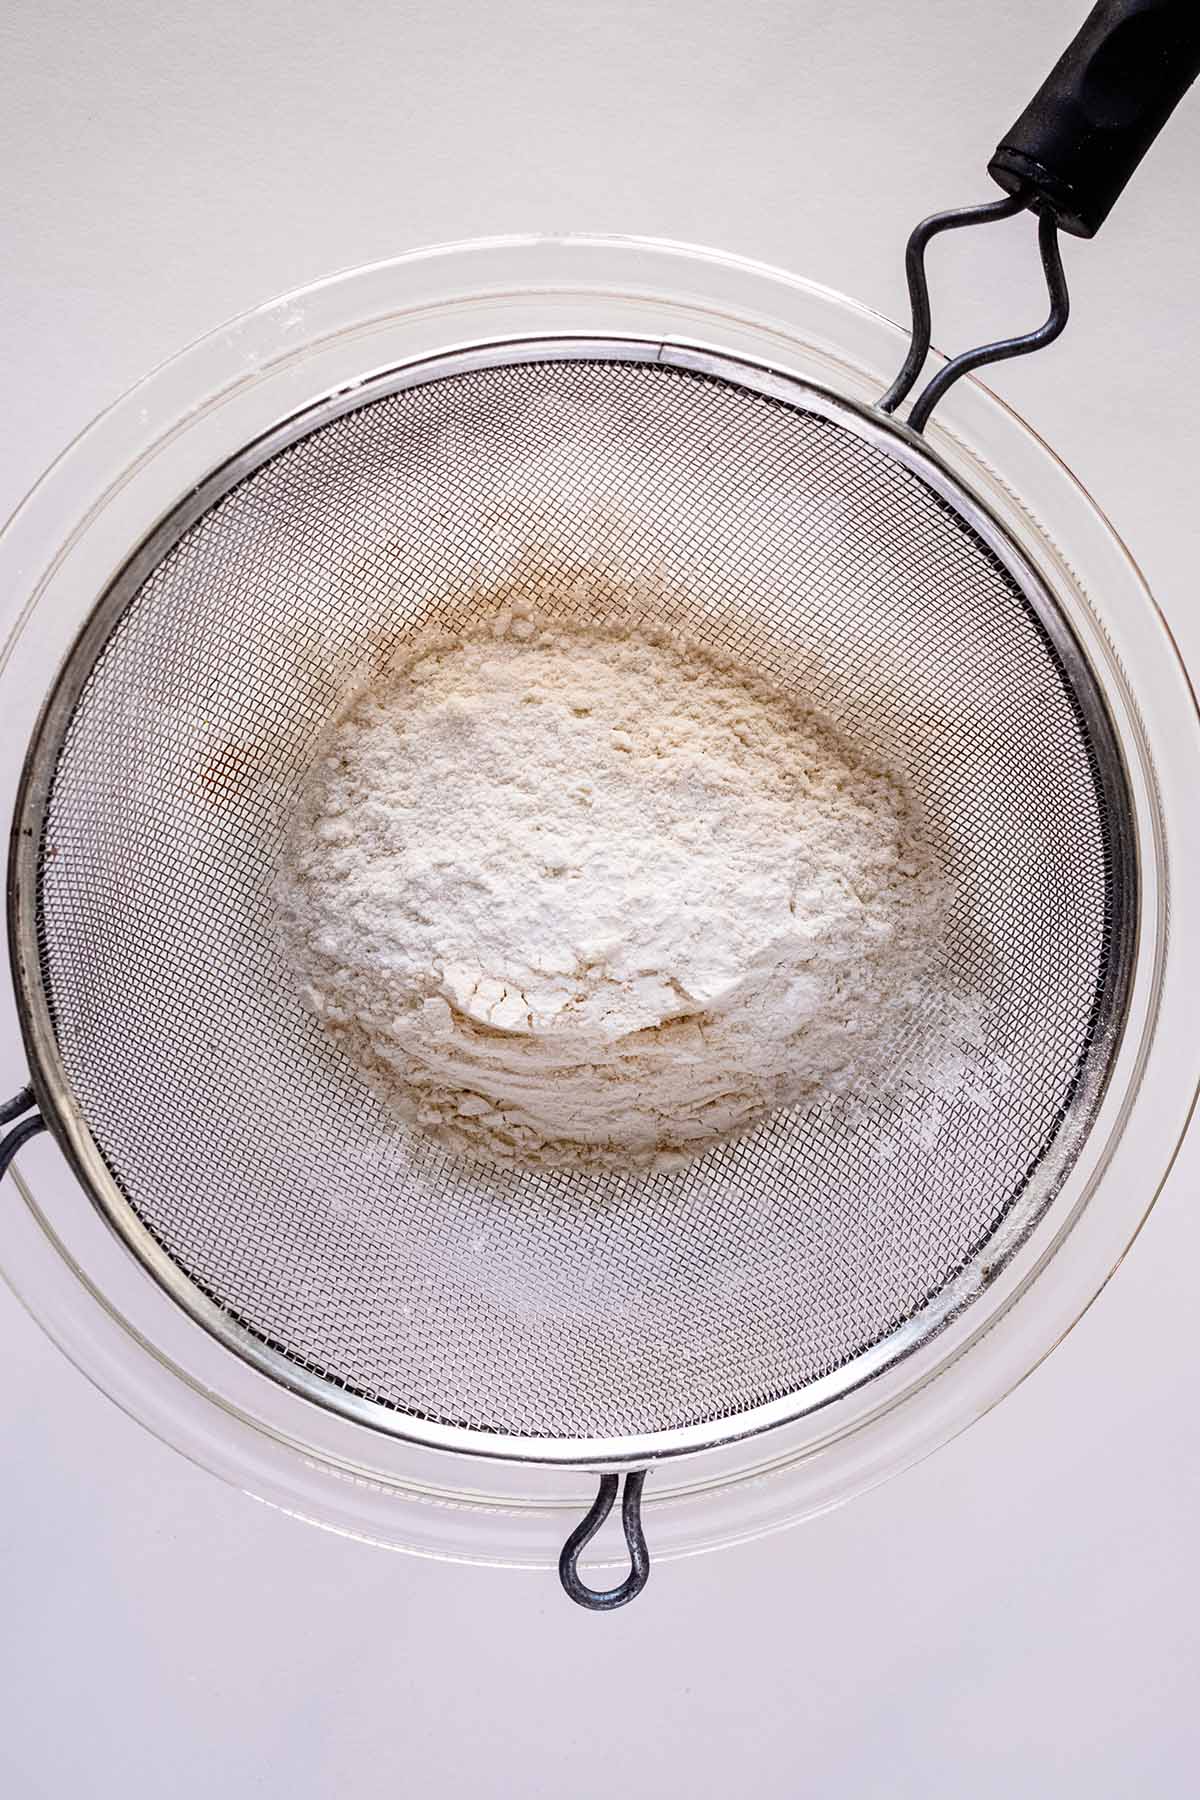 Overhead view of dry ingredients being sifted into a glass bowl